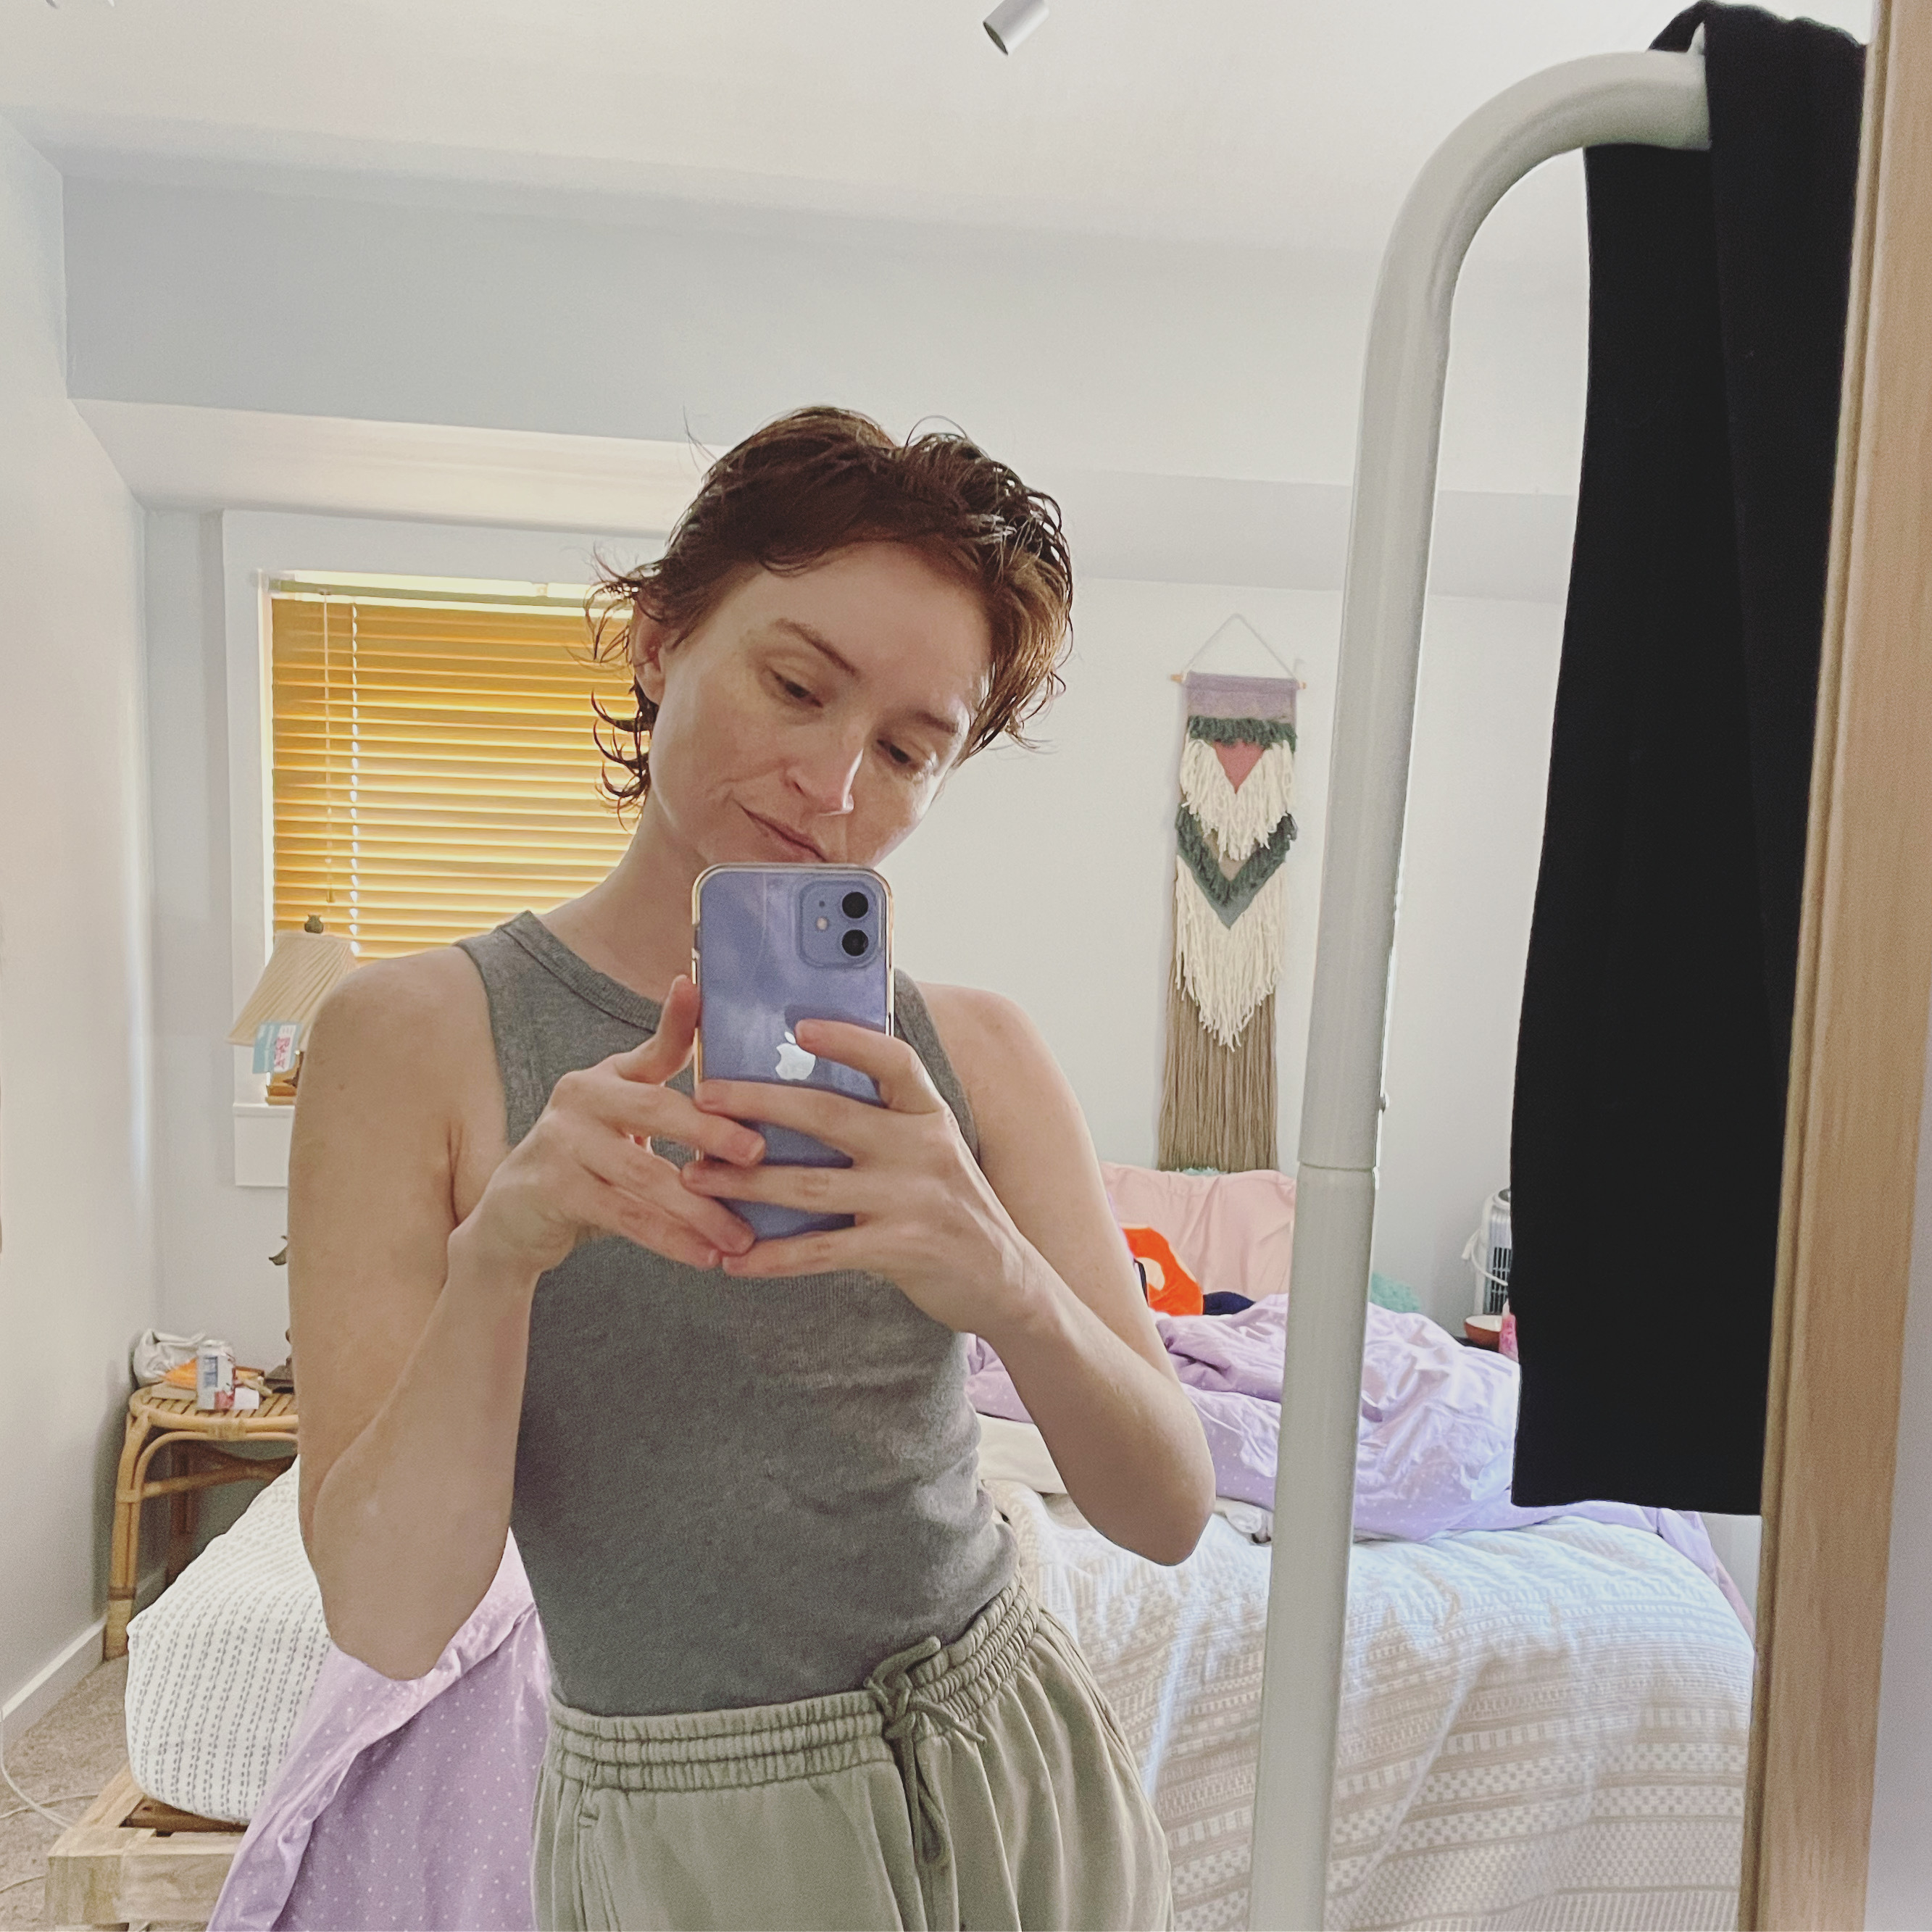 the author taking a mirror selfie in her bedroom wearing a tank top and sweatpants